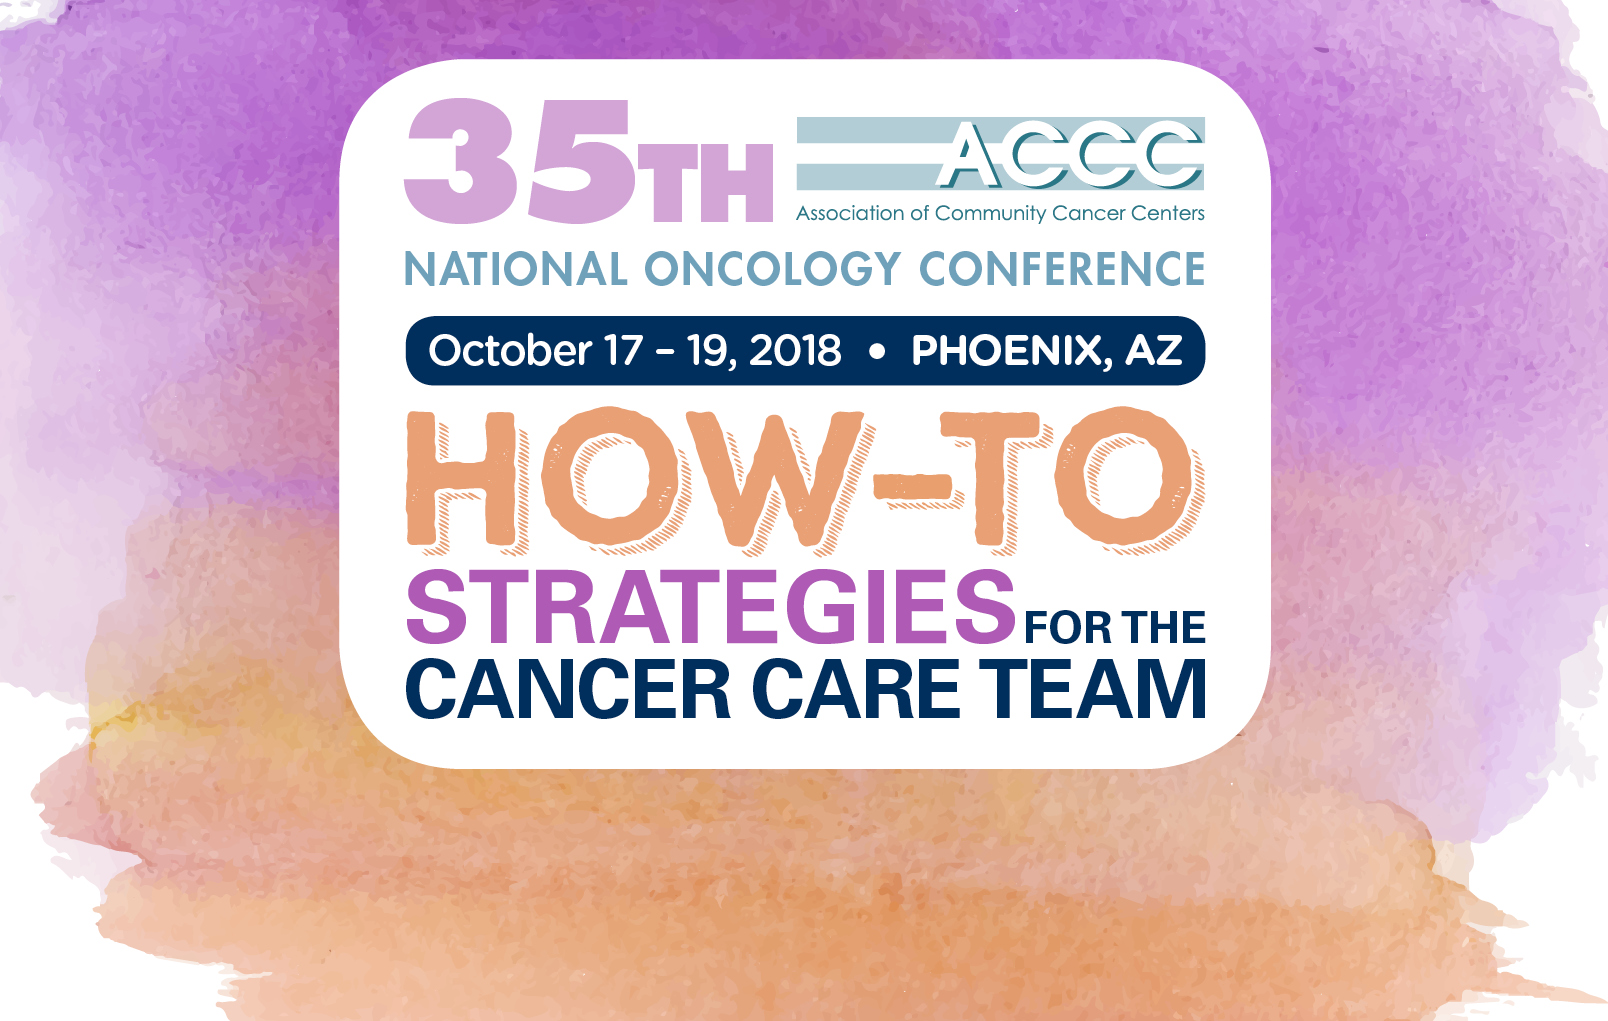 ACCC Association of Community Cancer Centers